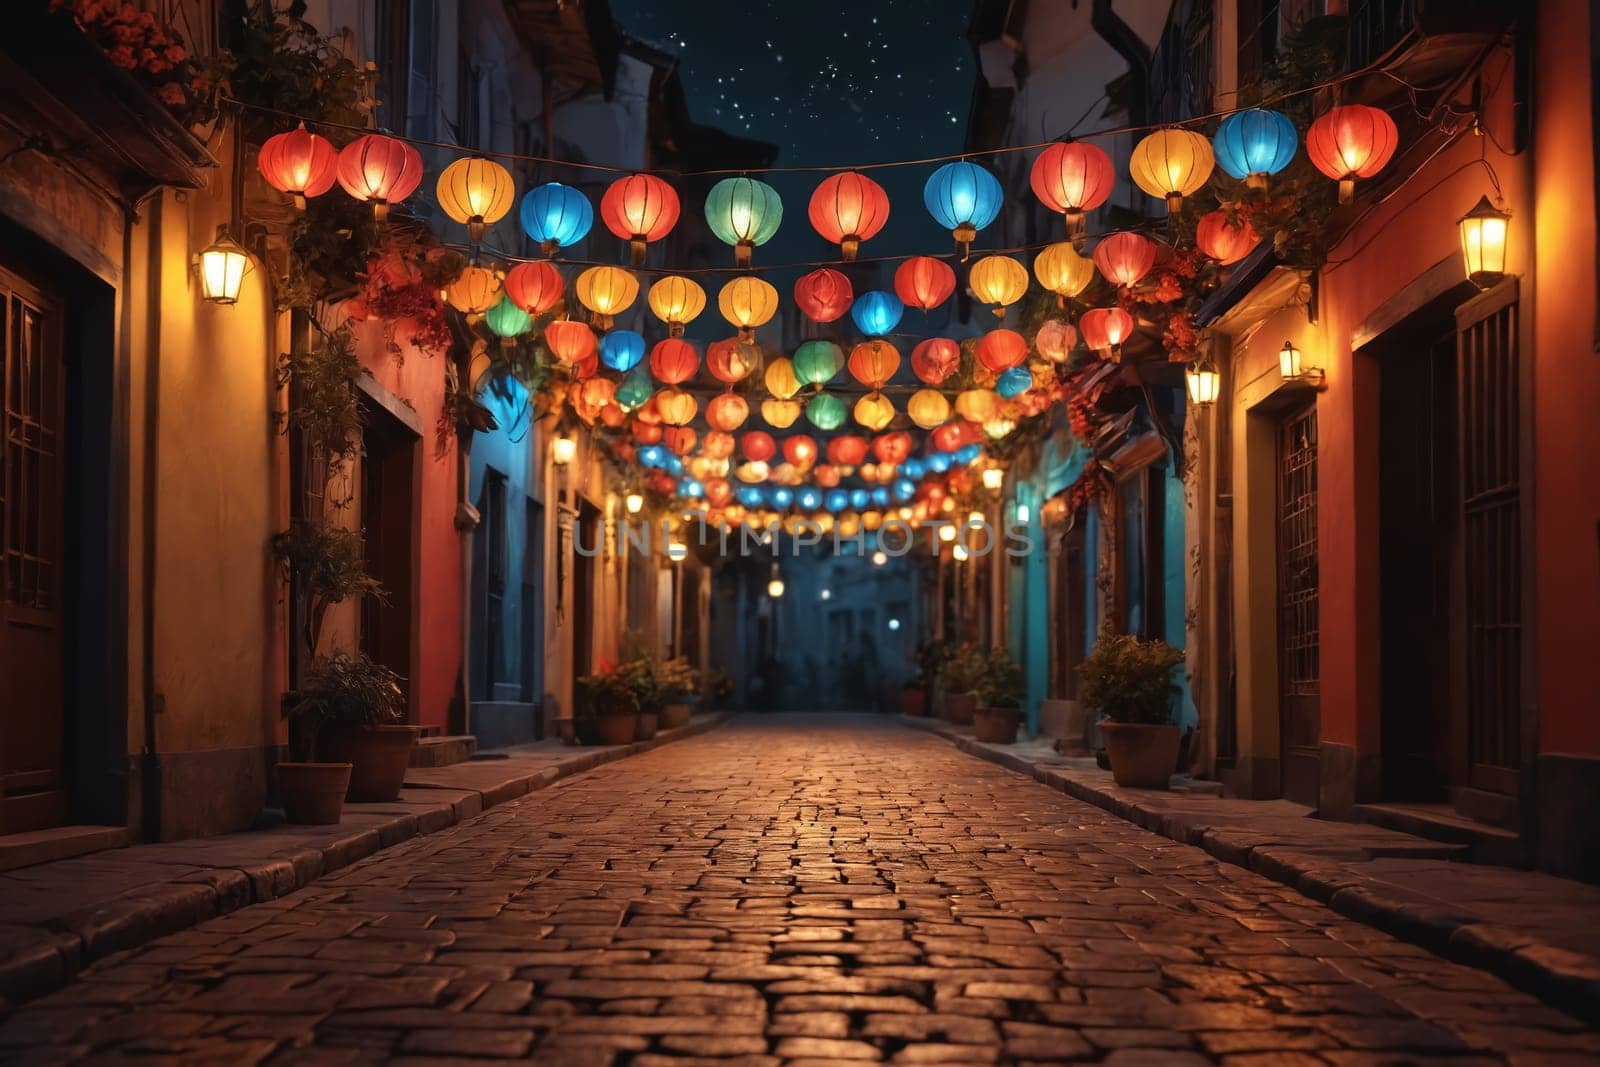 A Nighttime Symphony of Lantern Lights in Urban Celebration by Andre1ns